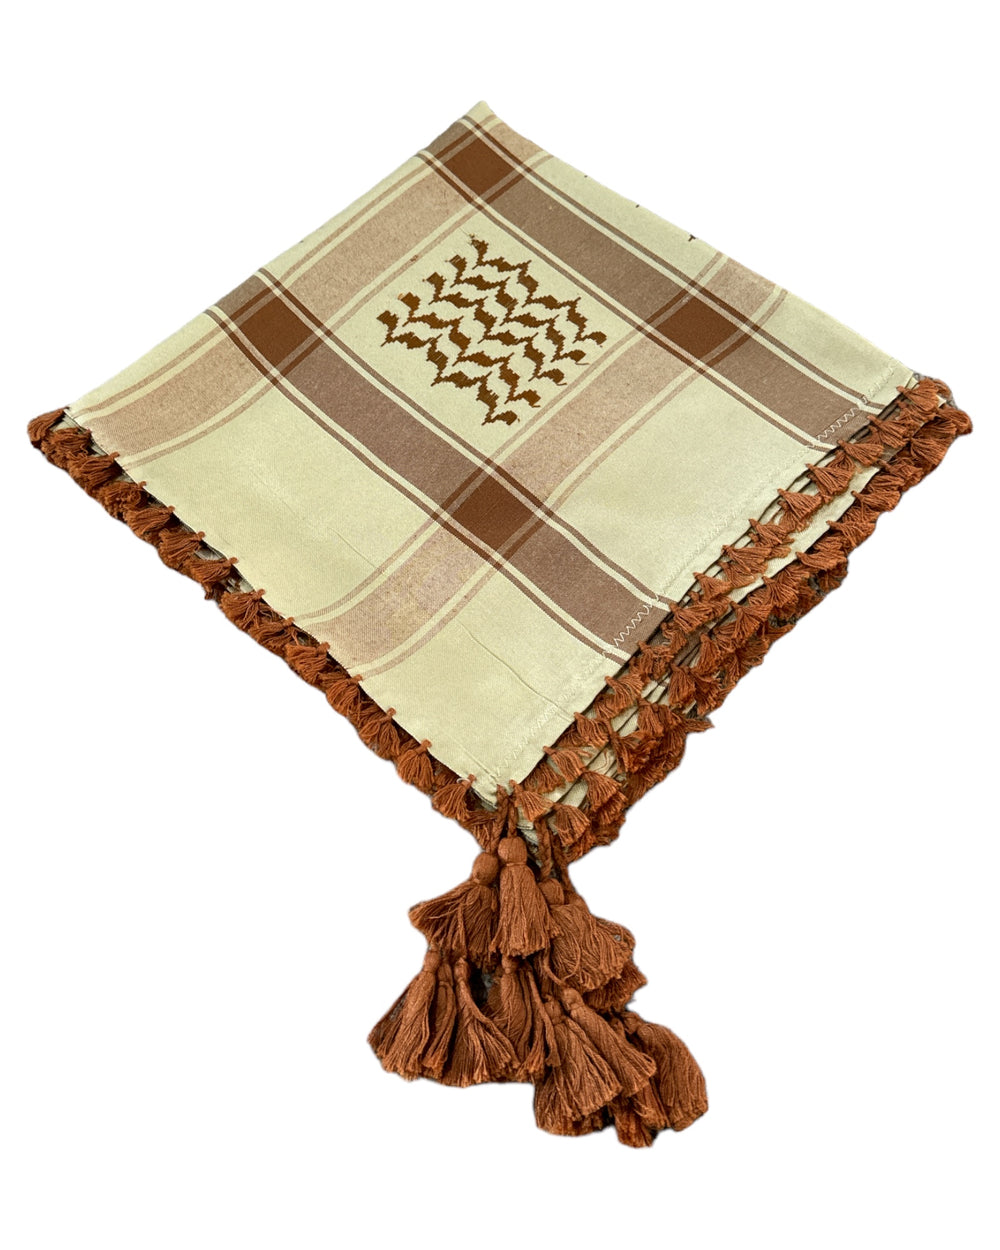 PALESTINE'S SYMBOLIC SHAMI  light brown and caramel brown  PATTERN DESIGN WITH BRAIDS ZUHD SHEMAG 69